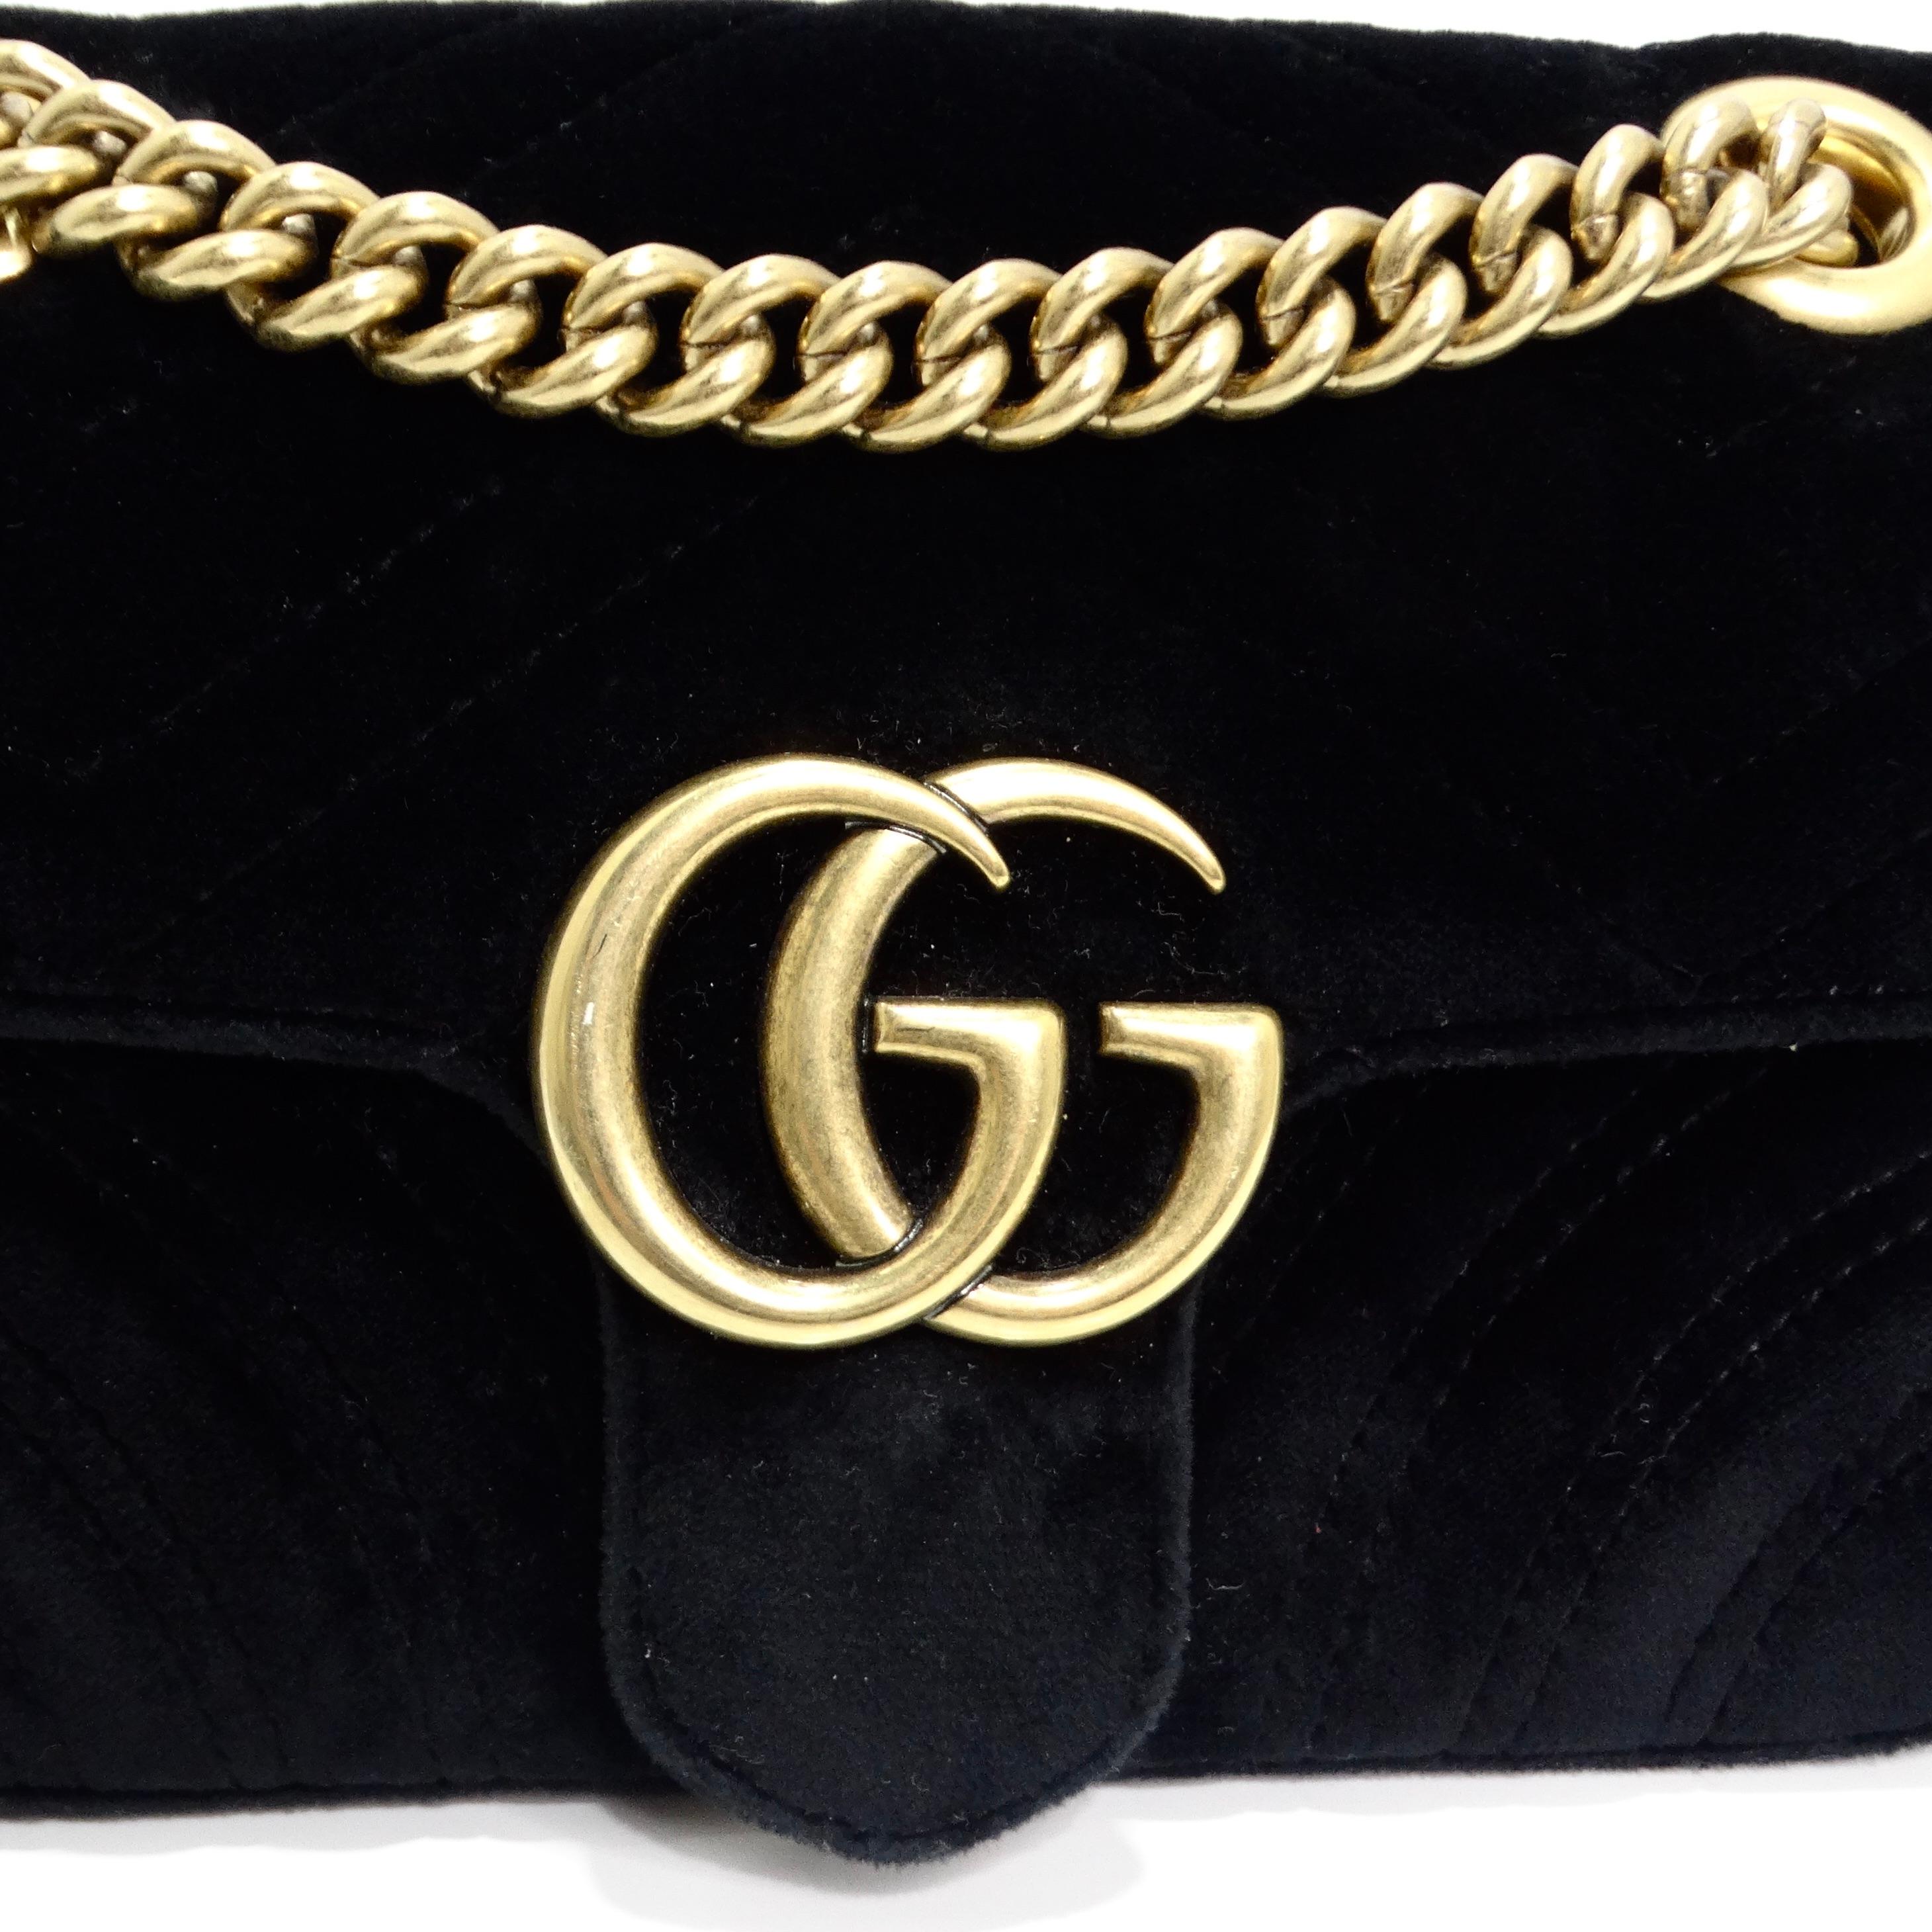 The Gucci Velvet Matelasse Mini GG Marmont Shoulder Bag in Black is a refined and luxurious accessory that combines elegance with modern flair. Crafted from soft quilted velvet in a timeless black hue, the bag exudes sophistication. The heart